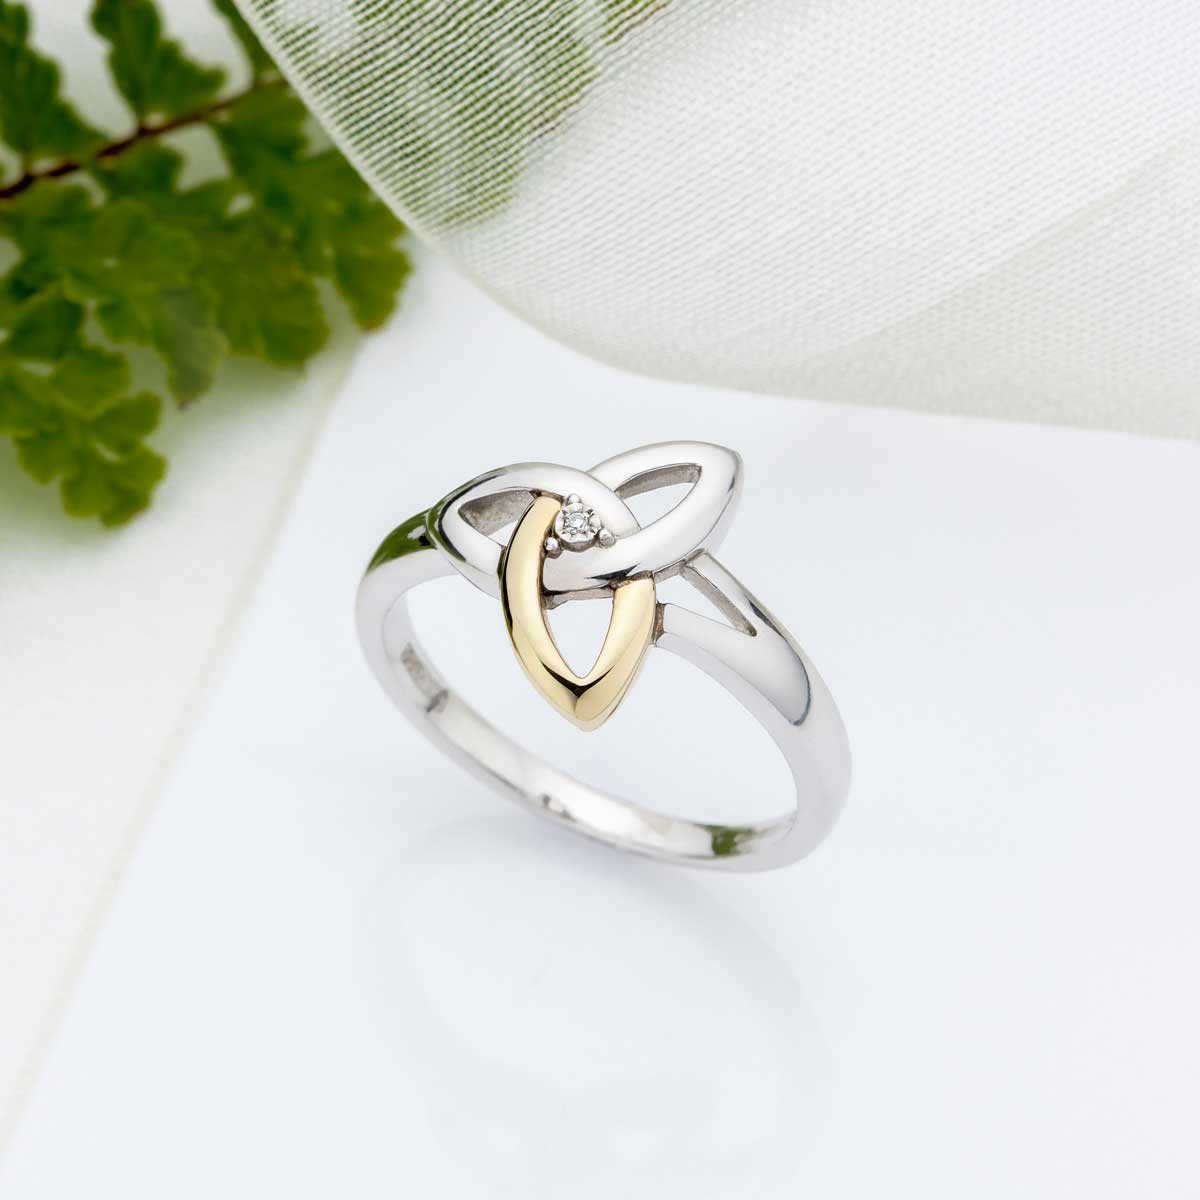 Product image for Celtic Ring - Silver, 10k Gold & Diamond Trinity Knot Ring